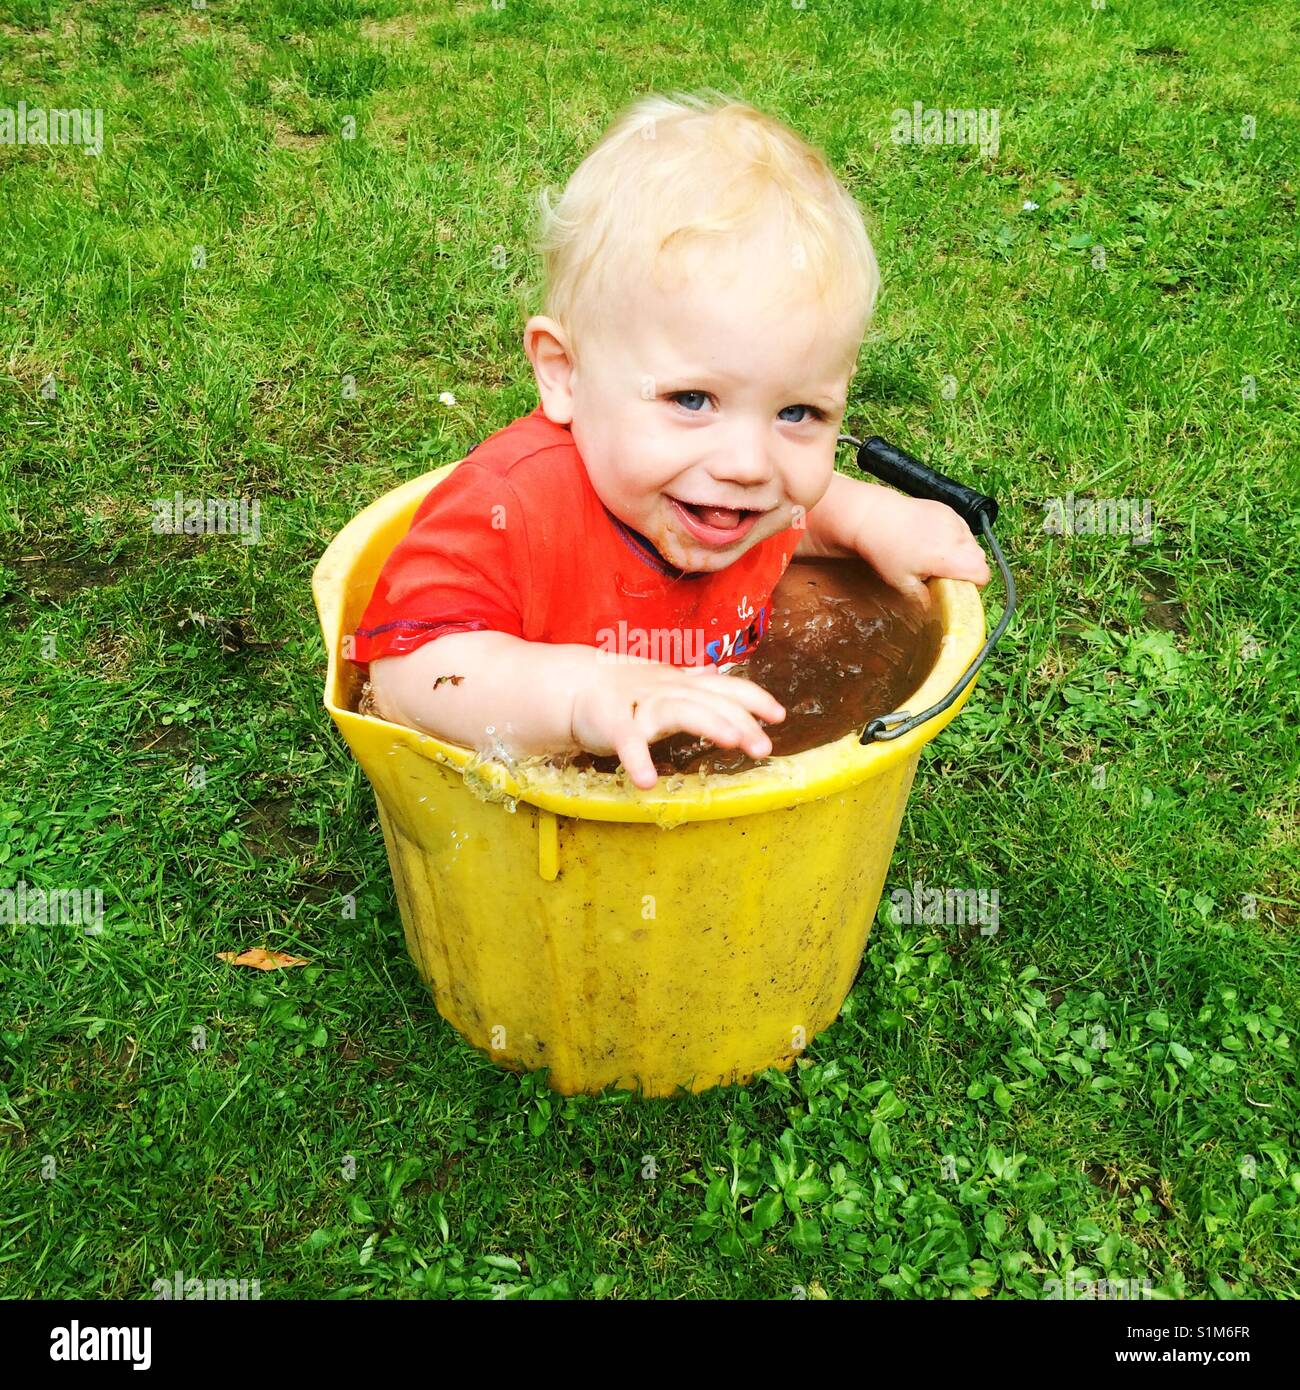 Eleven month old baby boy sitting in a bucket of dirty water Stock Photo